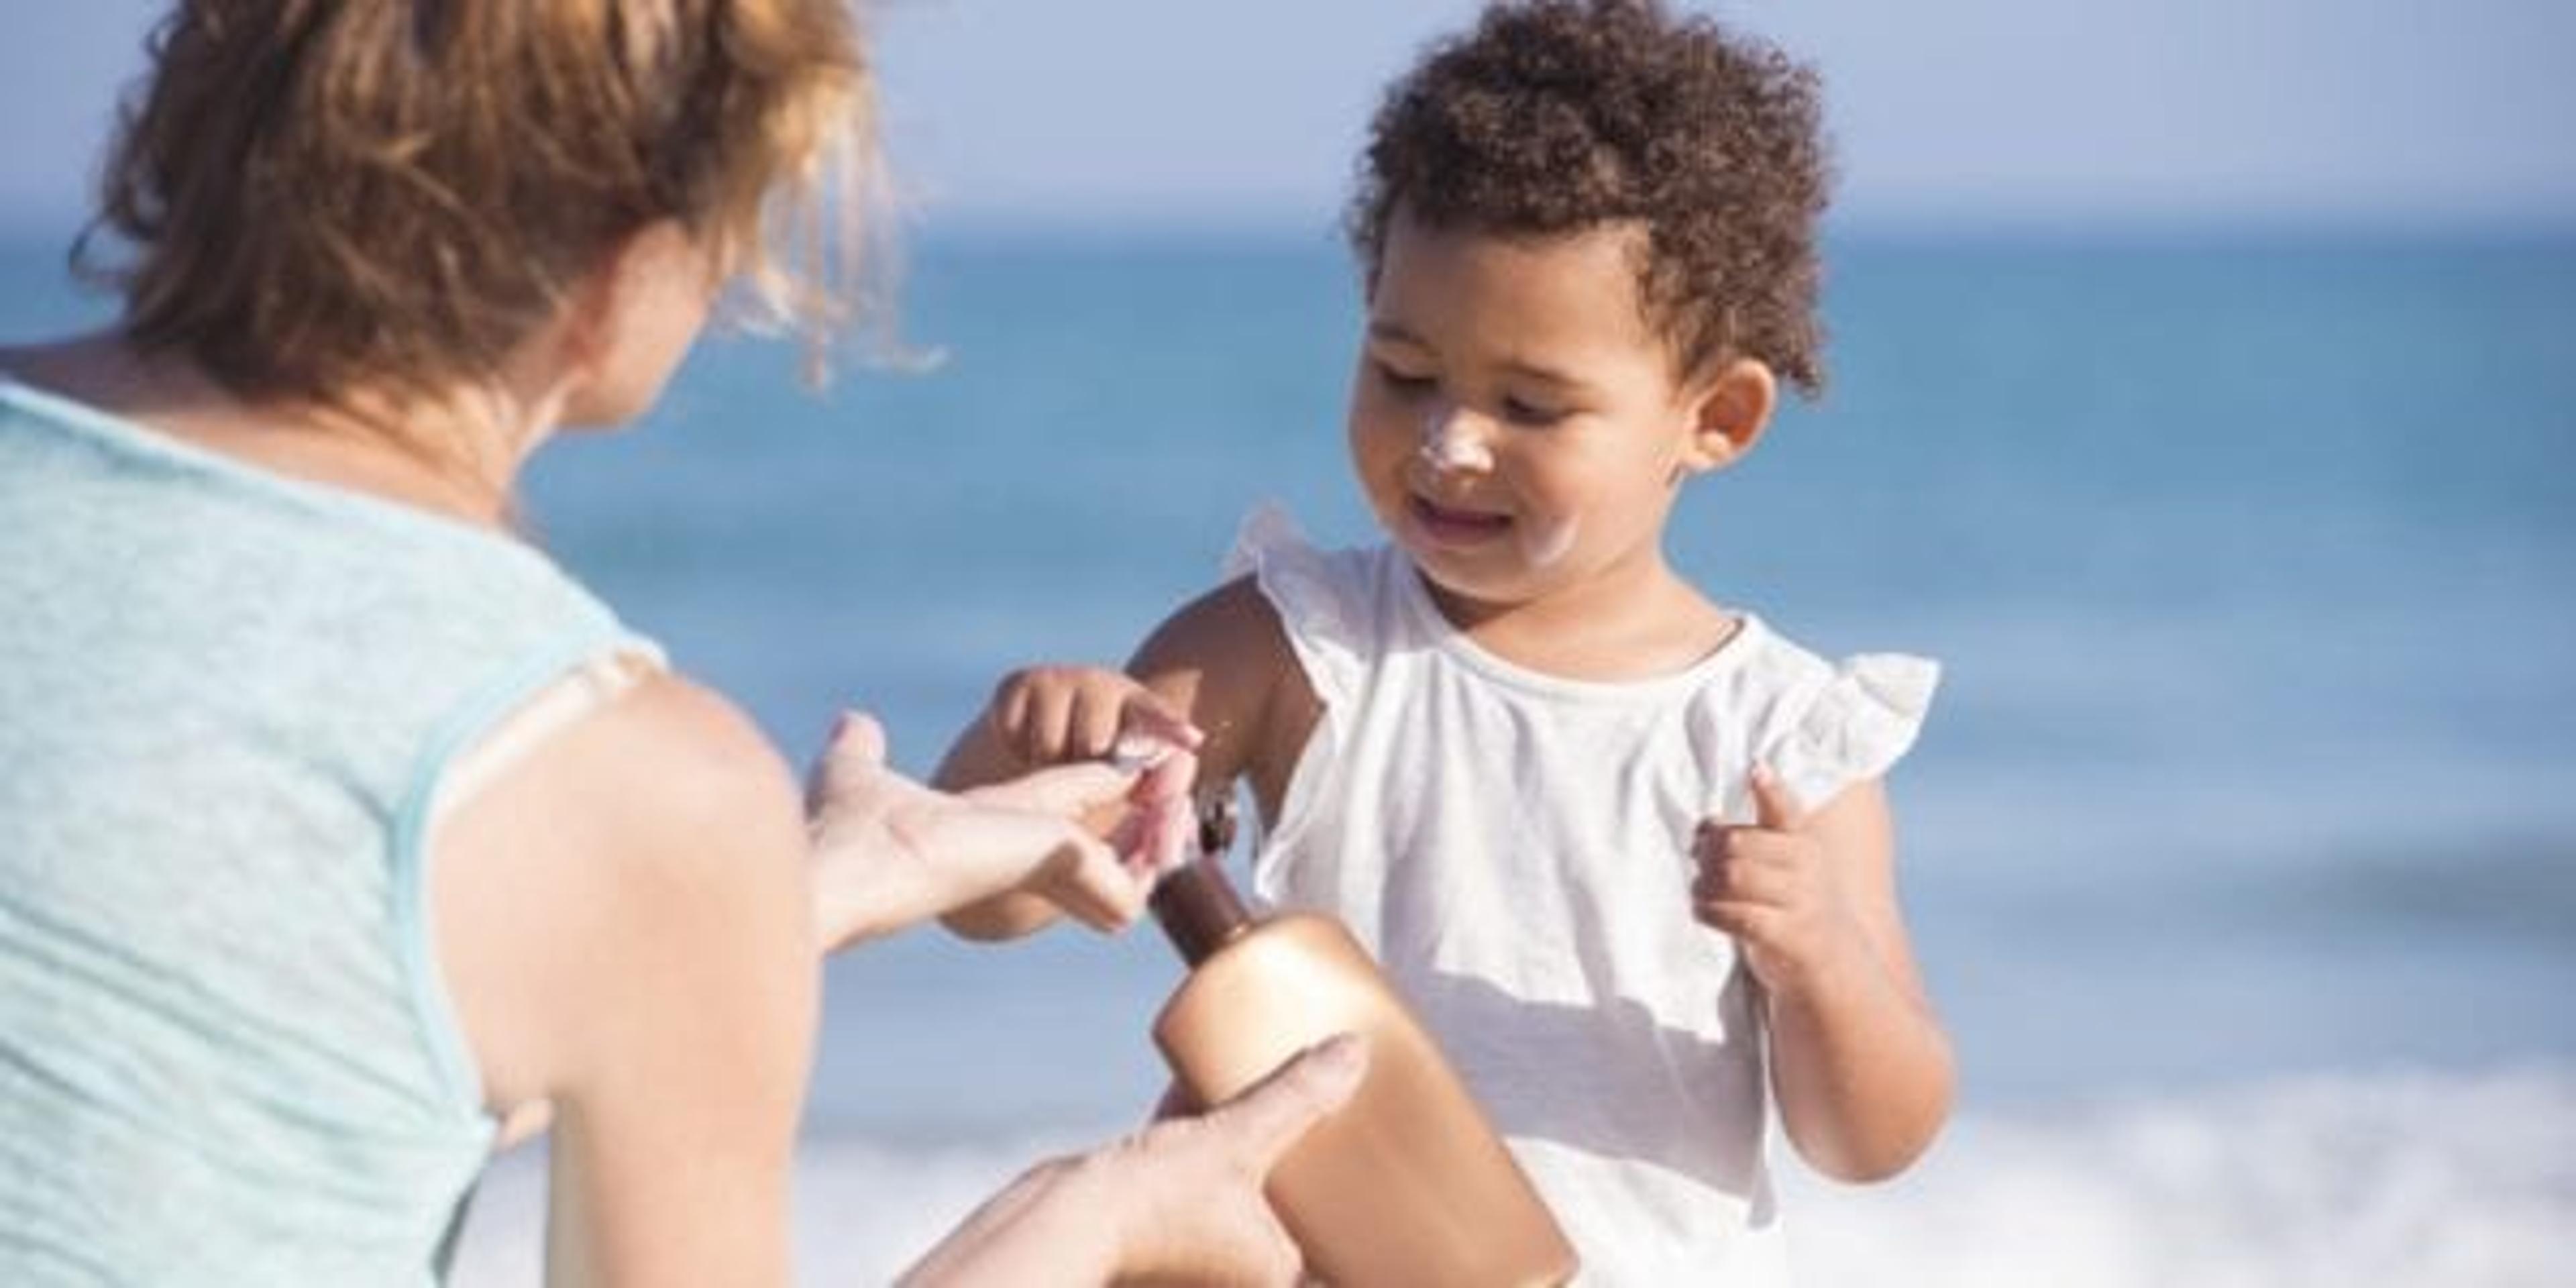 mom putting sunscreen on child at beach